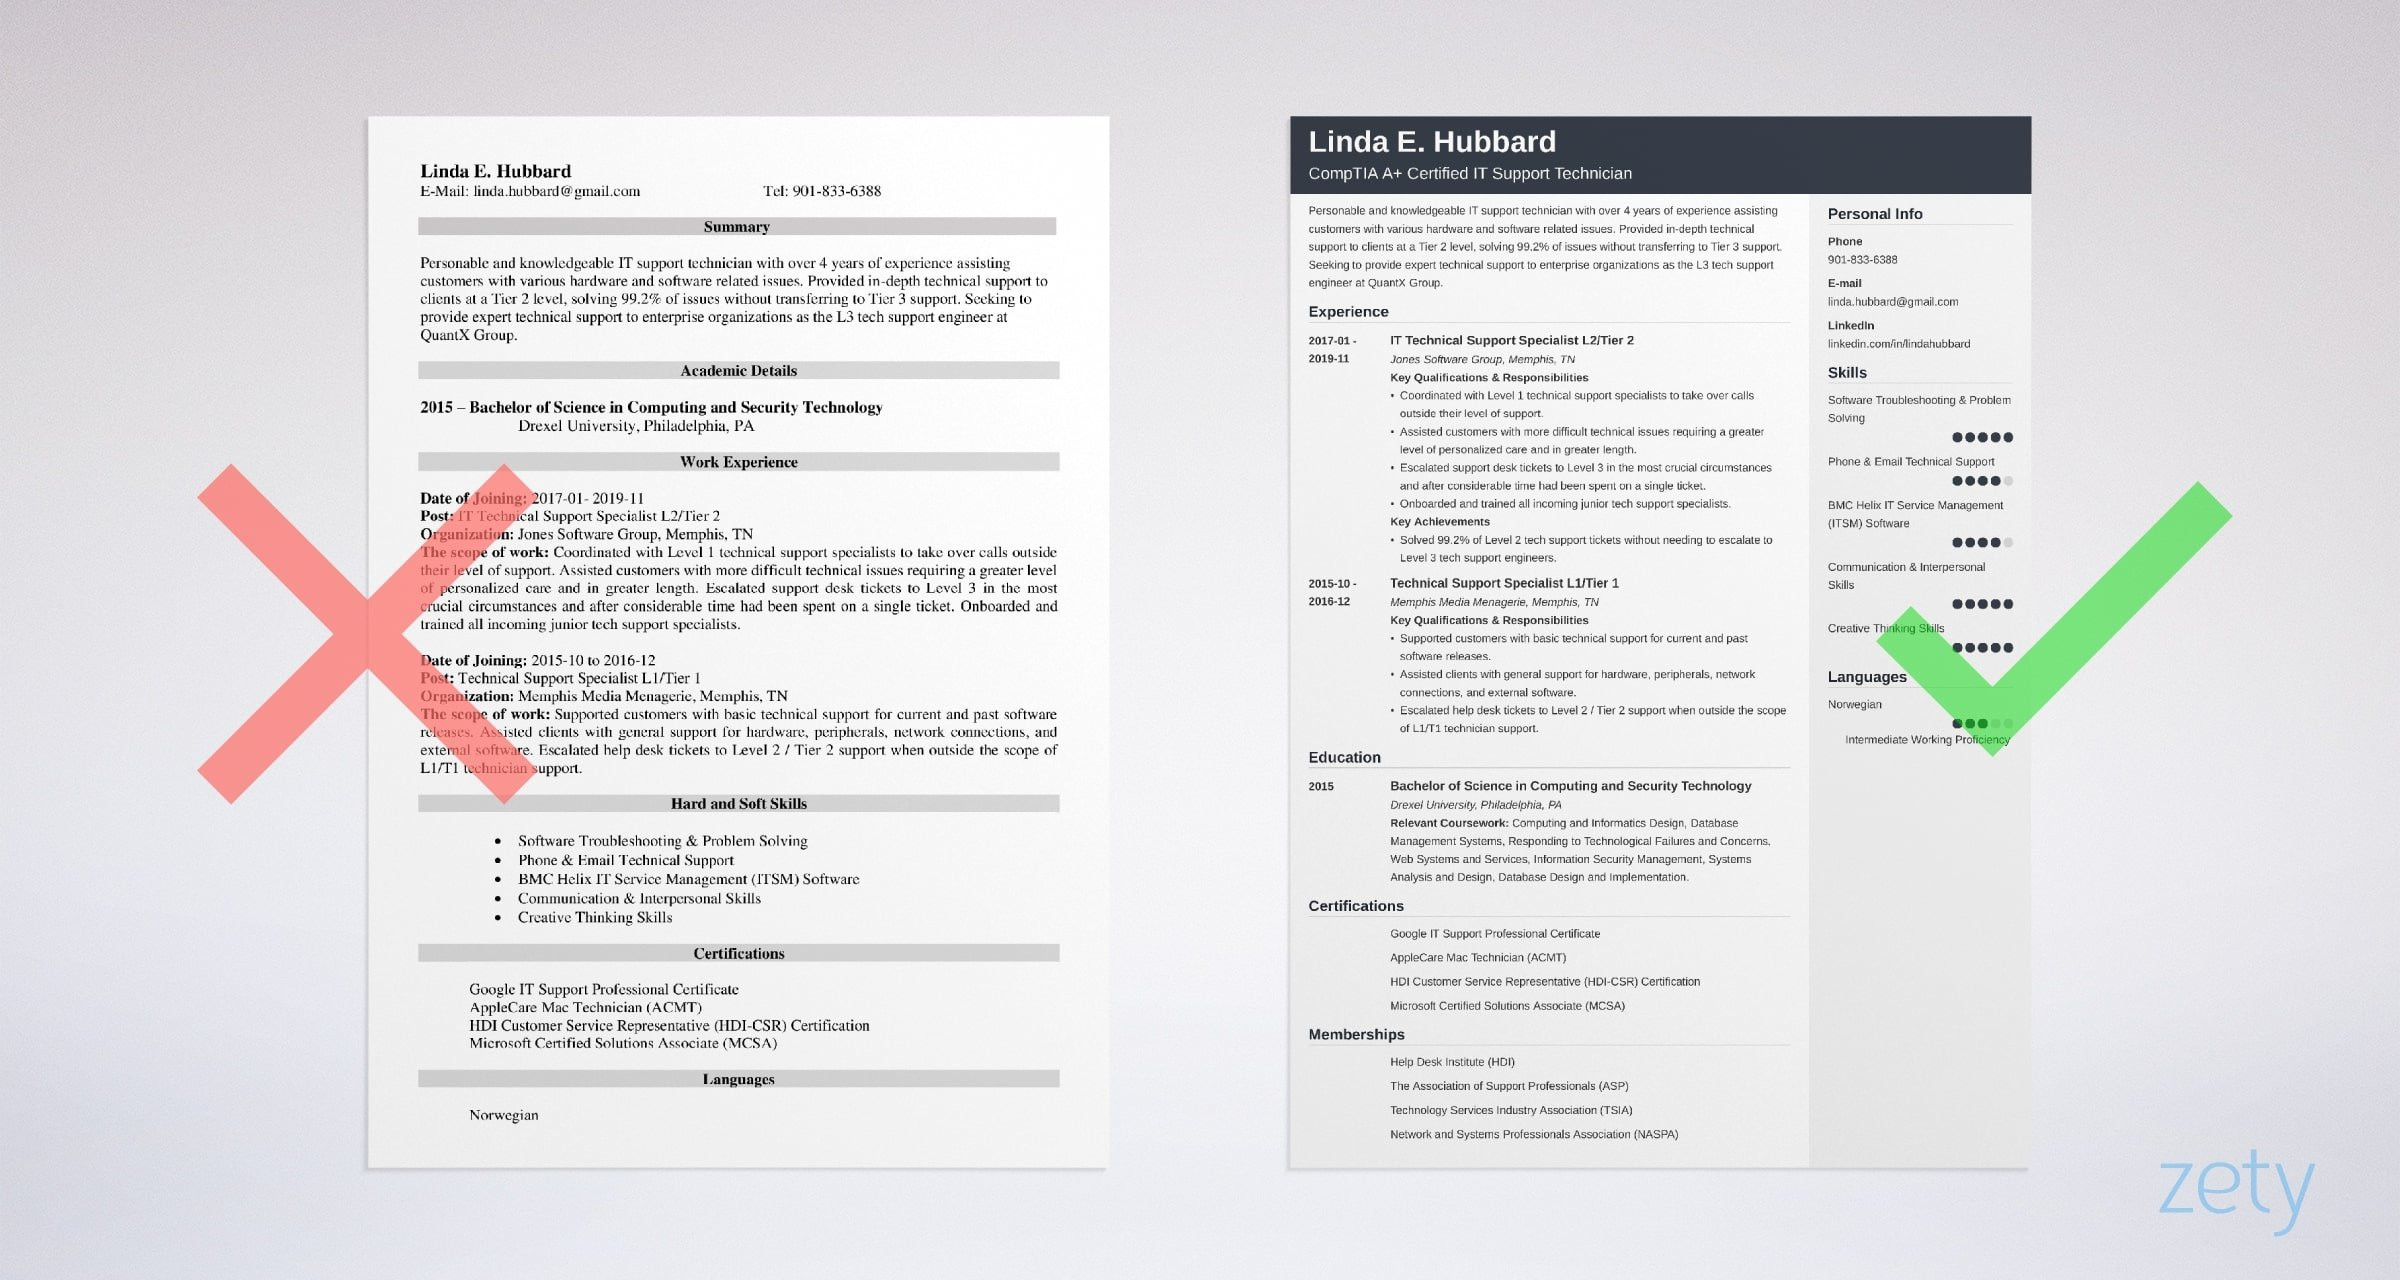 Sample Resume Of It Technical Support Technical Support Resume Sample & Job Description [20 Tips]